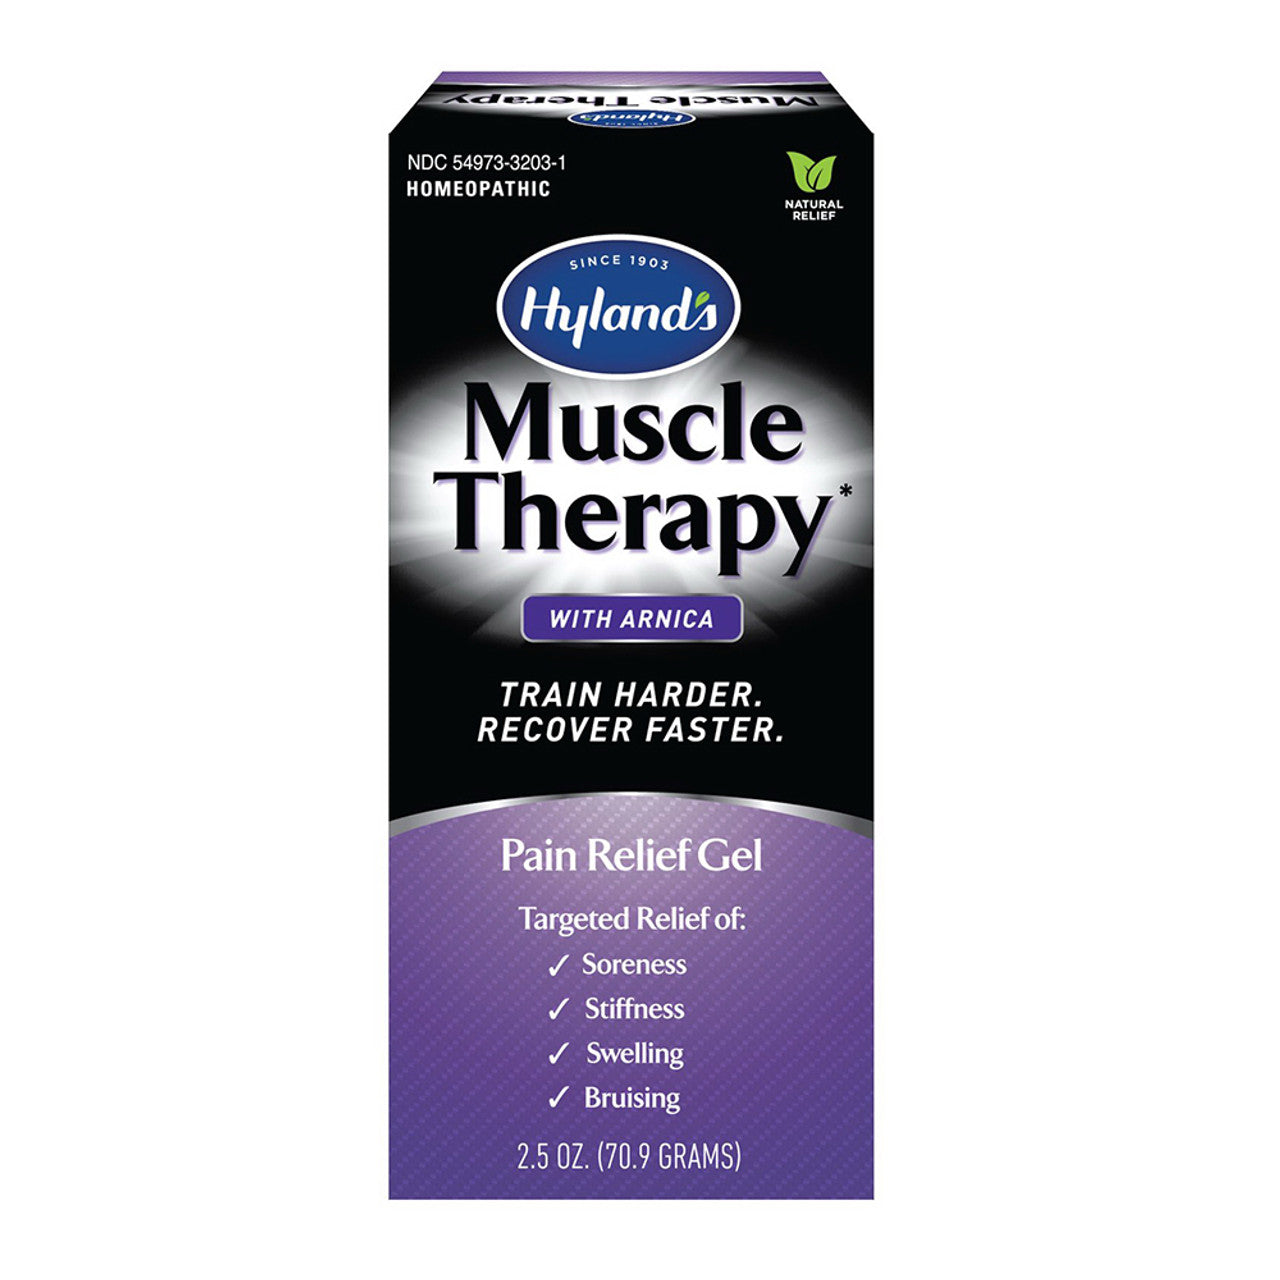 Hylands Muscle Therapy with Arnica Pain Relief Gel, 2.5 Oz